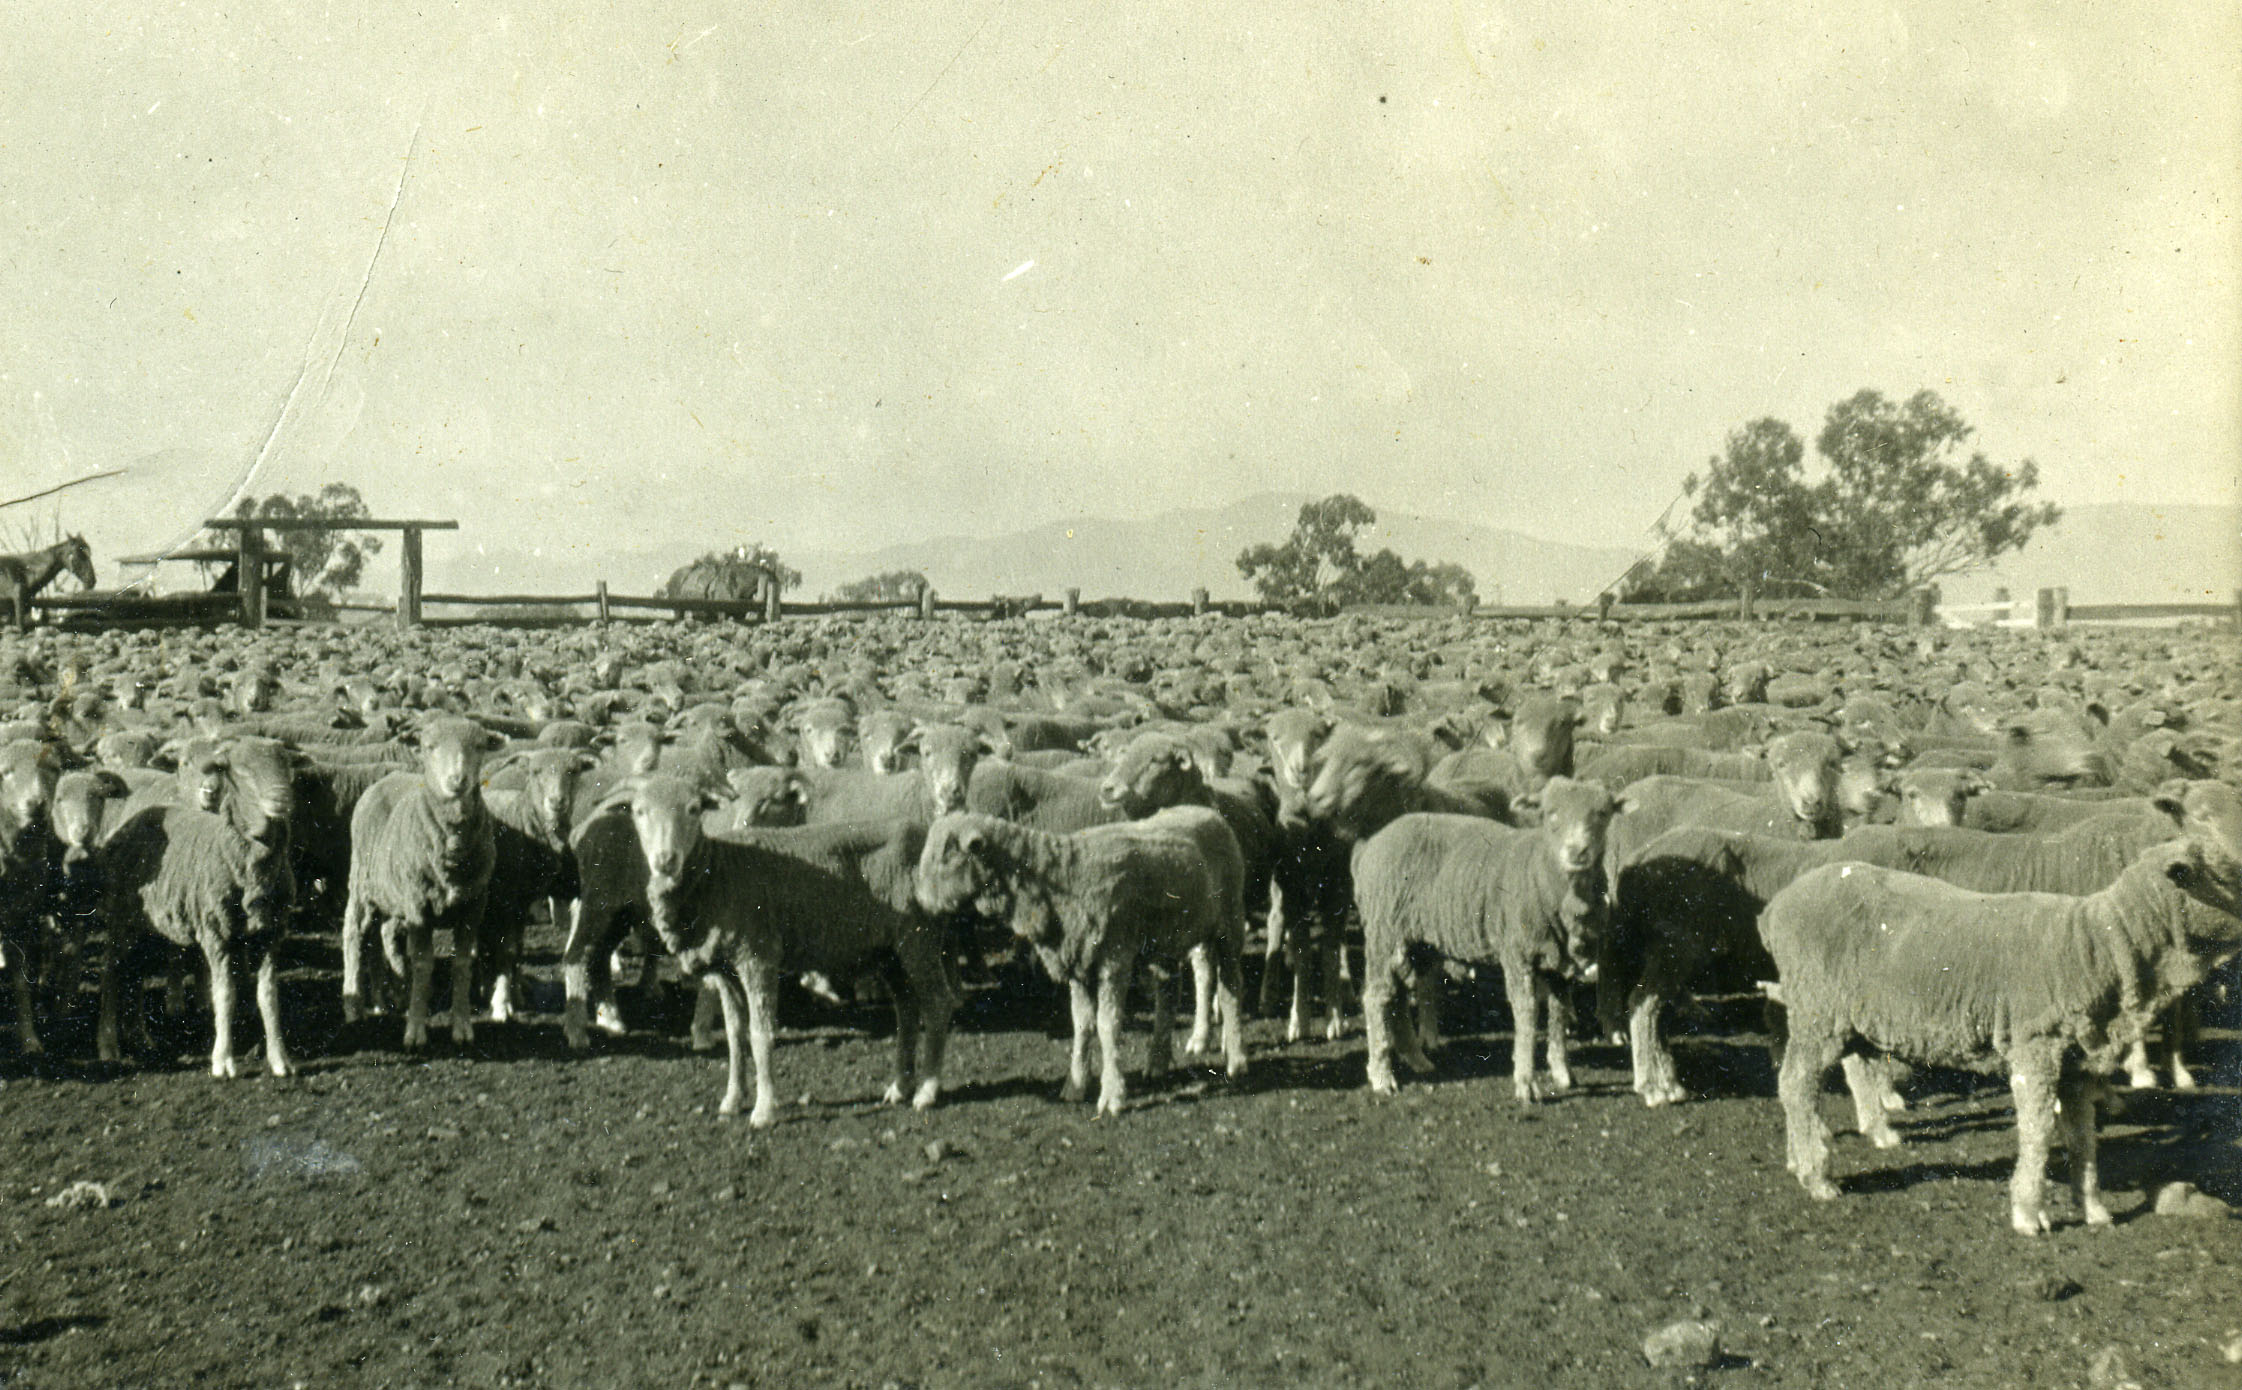 Wether hoggets for sale, Goonoo Goono, Peel Estate, New South Wales, 1921 (161-571). Photographer - Geoffrey T.A. Scott.